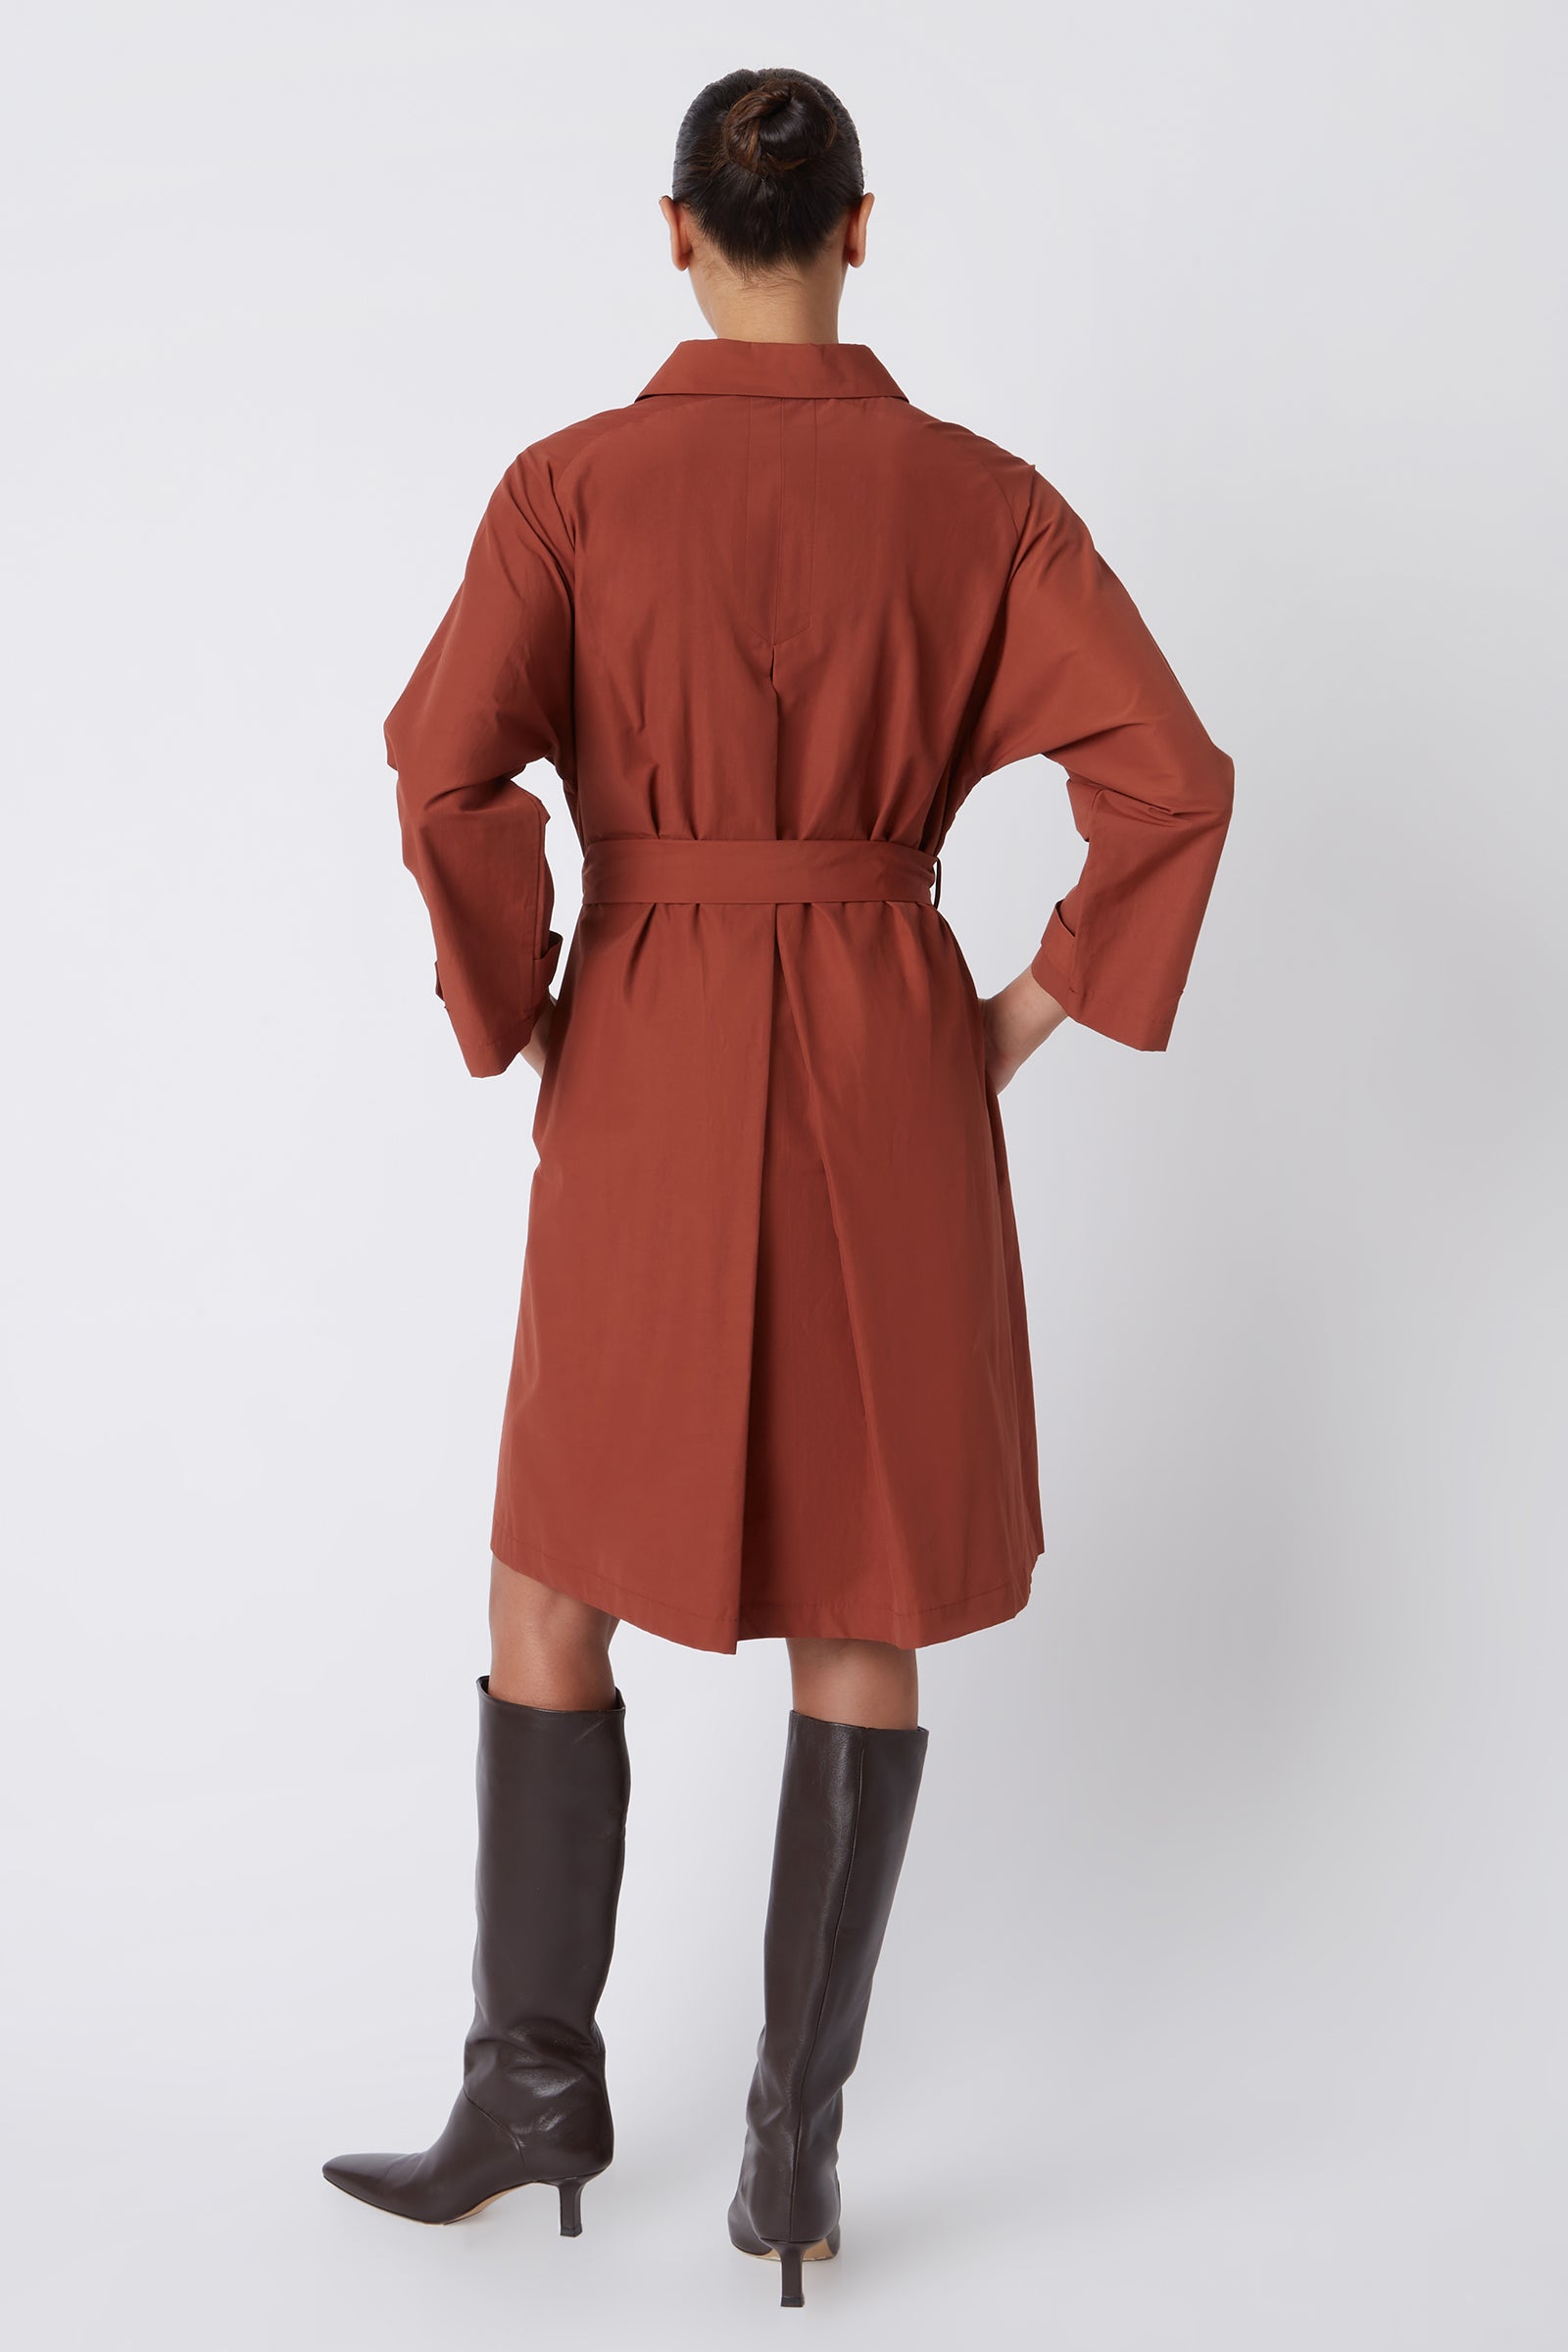 Kal Rieman Bonnie Pleat Back Dress in Rust Italian Broadcloth on Model with Hand on Dress Full Front View